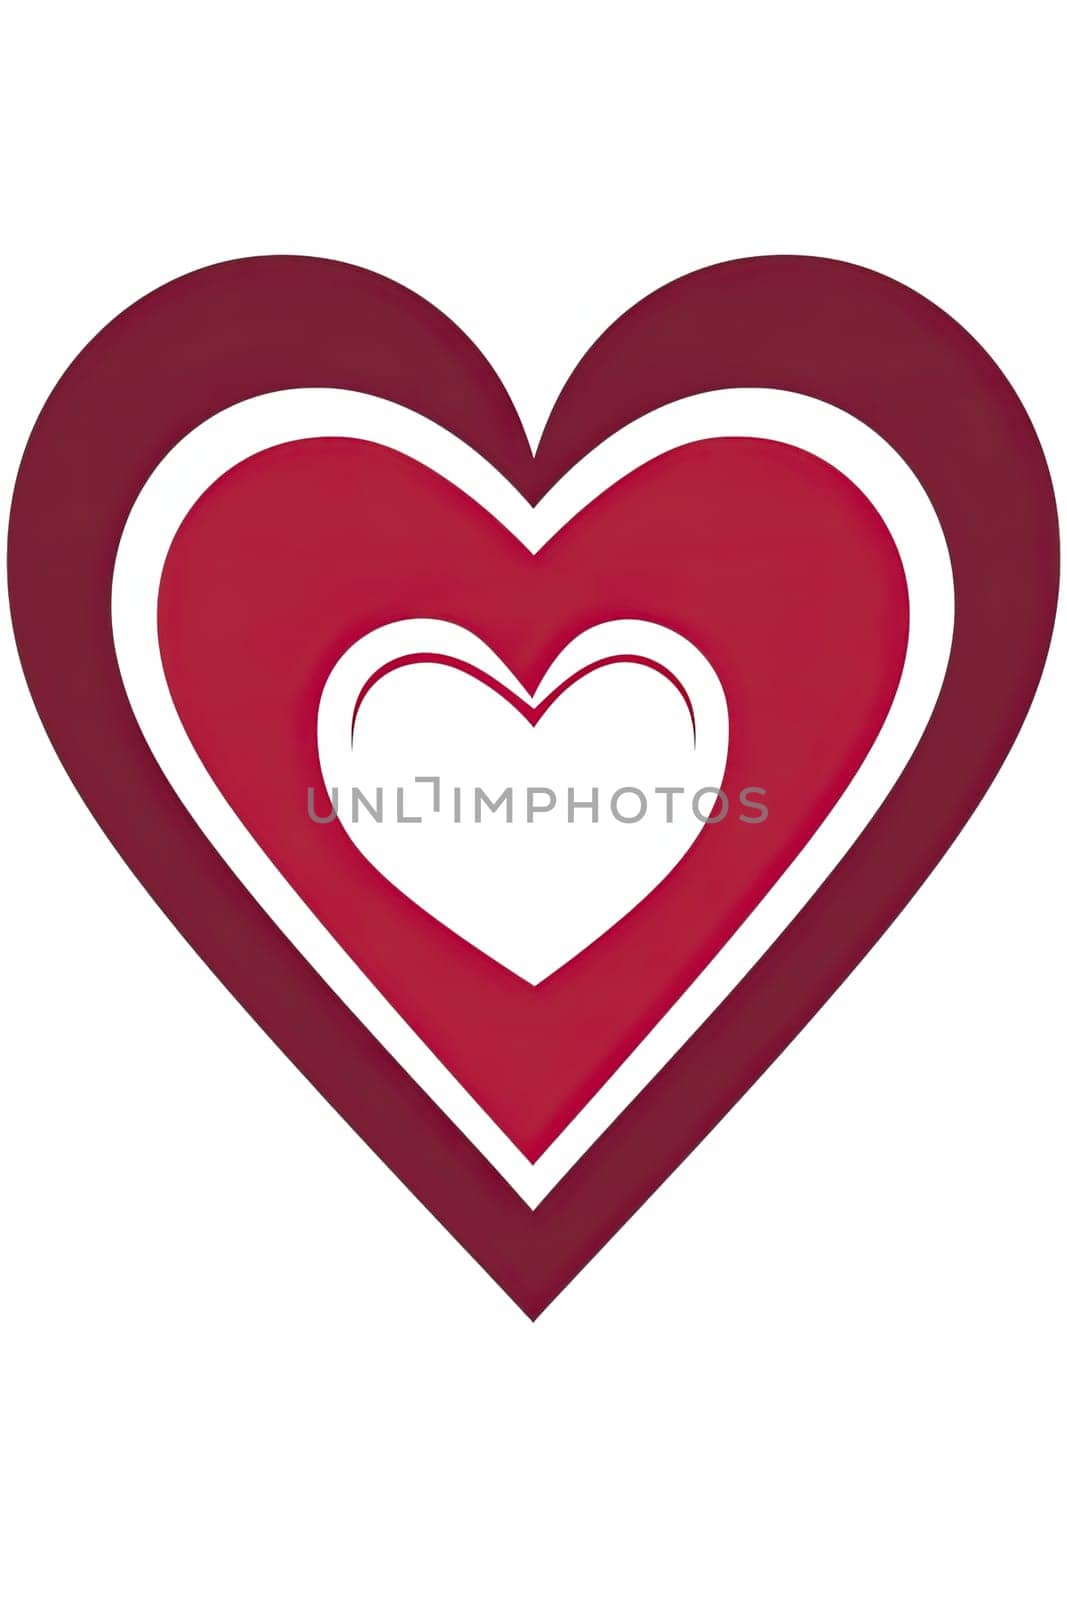 Red heart icon on white background. Love logo heart illustration by papatonic